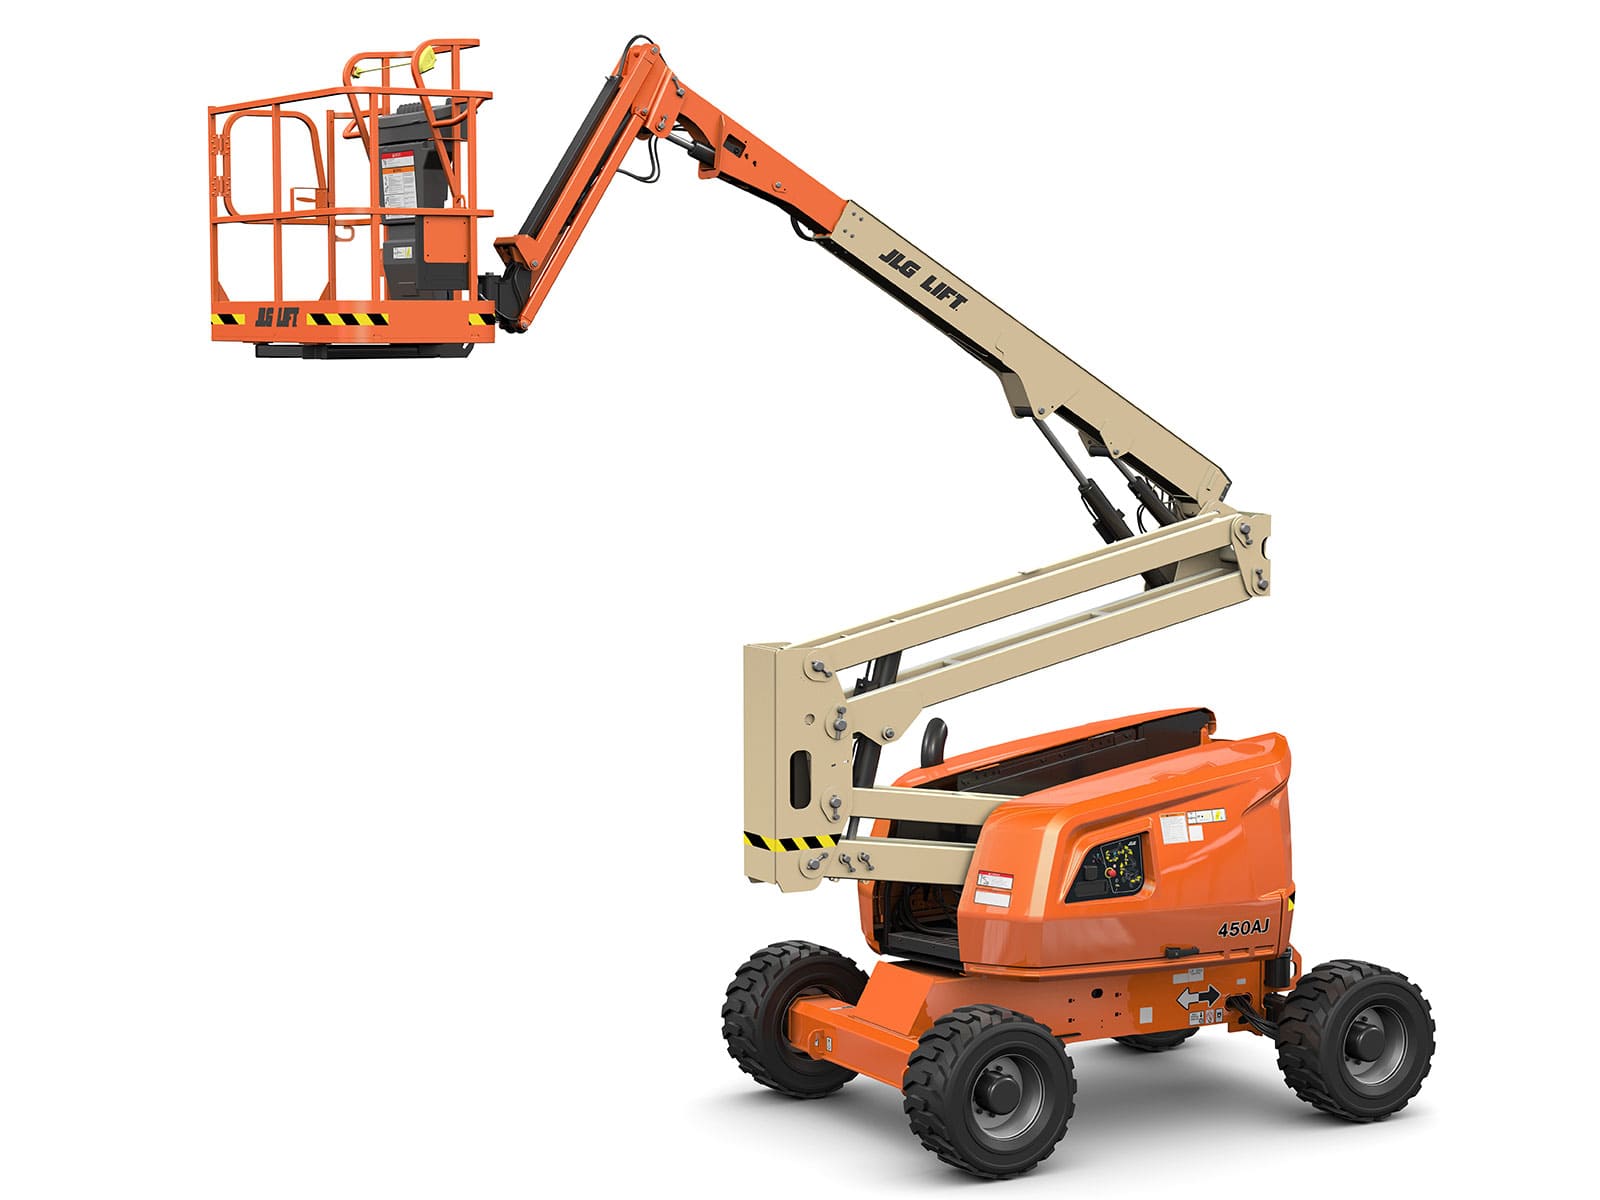 2007 JLG 600A Aerial Articulating MANLIFT Boom Lift Man BOOMLIFT With SKYPOWER for sale online 